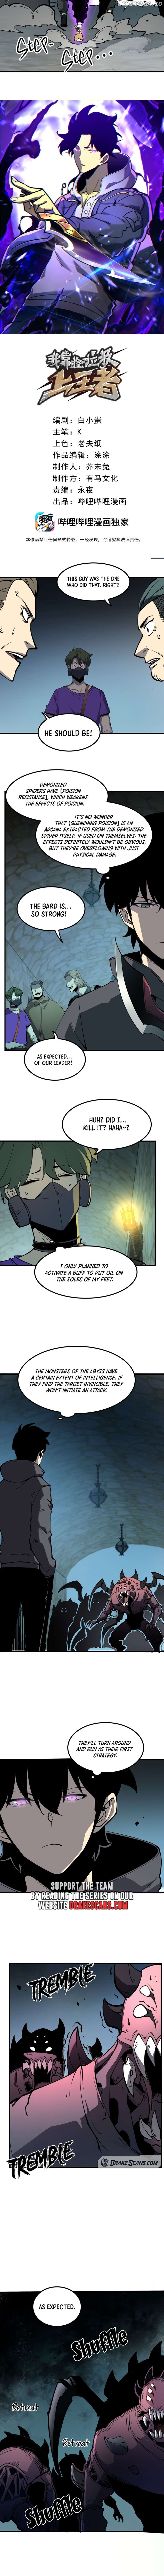 I Became The King by Scavenging Chapter 13 - page 3